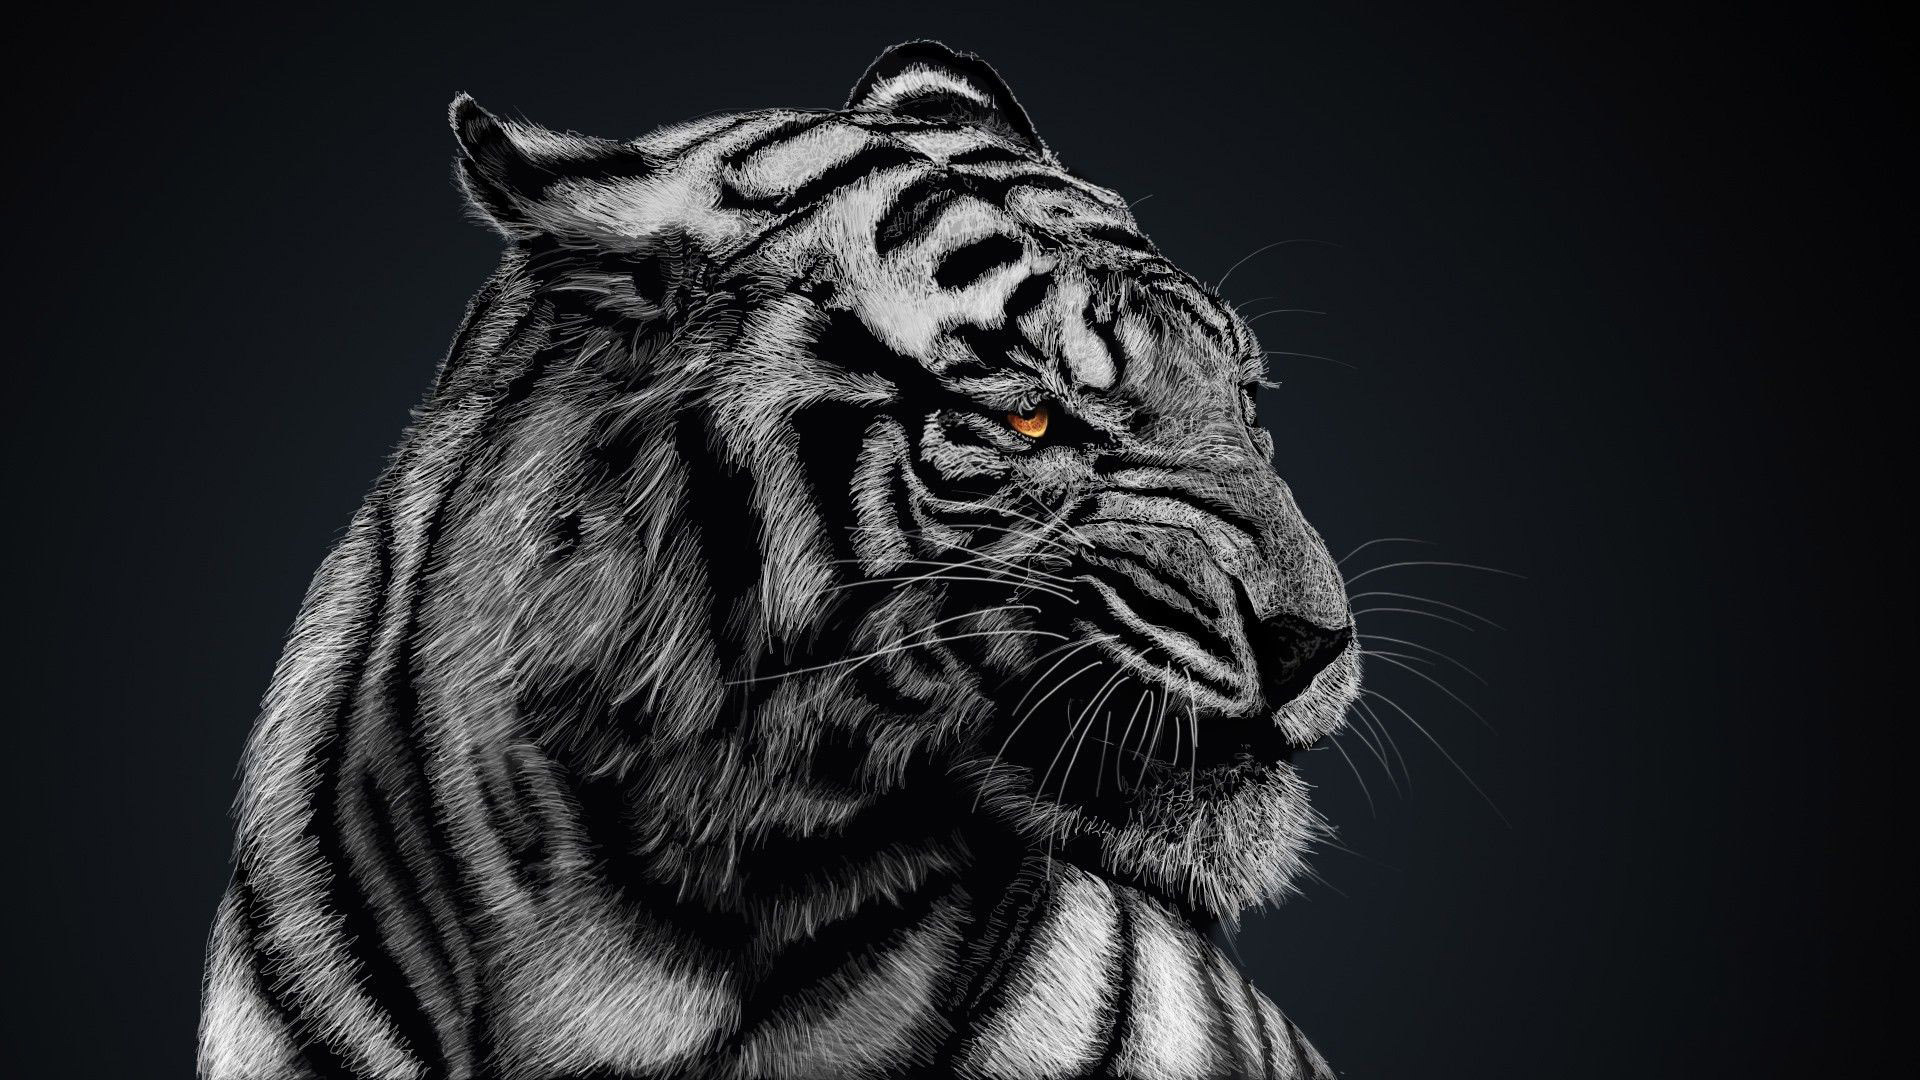 Black And White Tiger Wallpapers High Quality : Animal Wallpaper ...